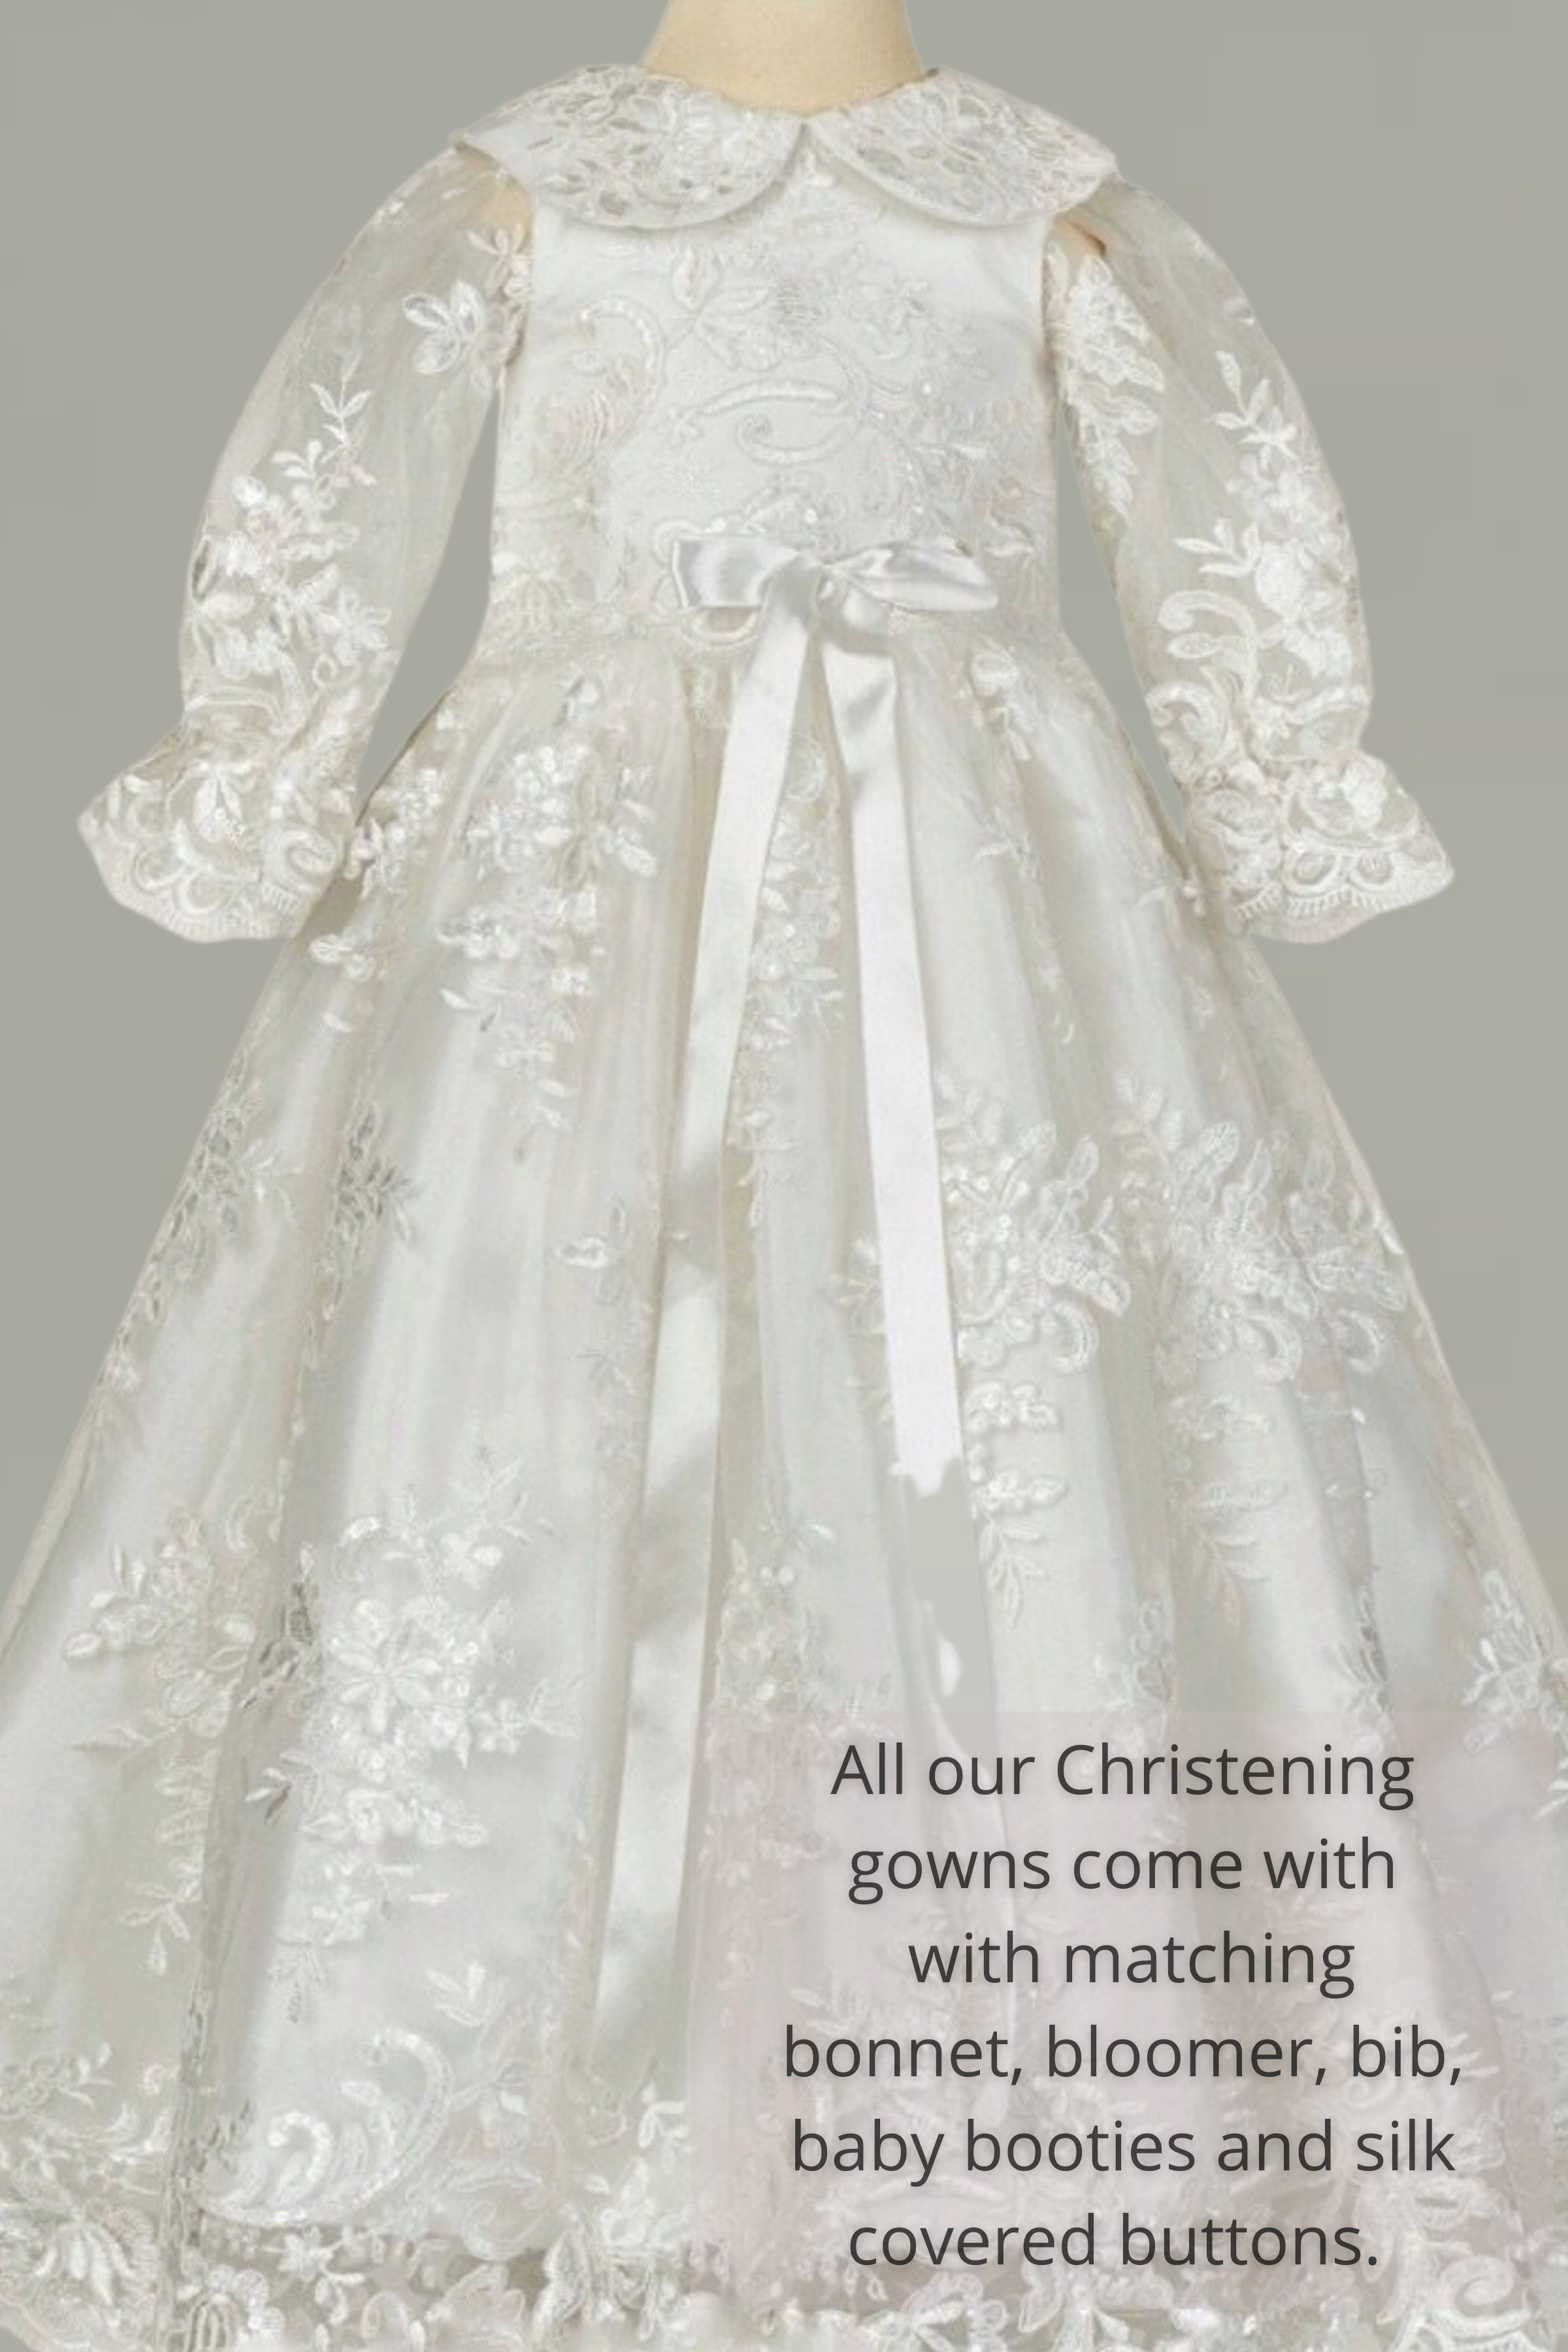 Long Christening Gowns - Busy B's Bridal